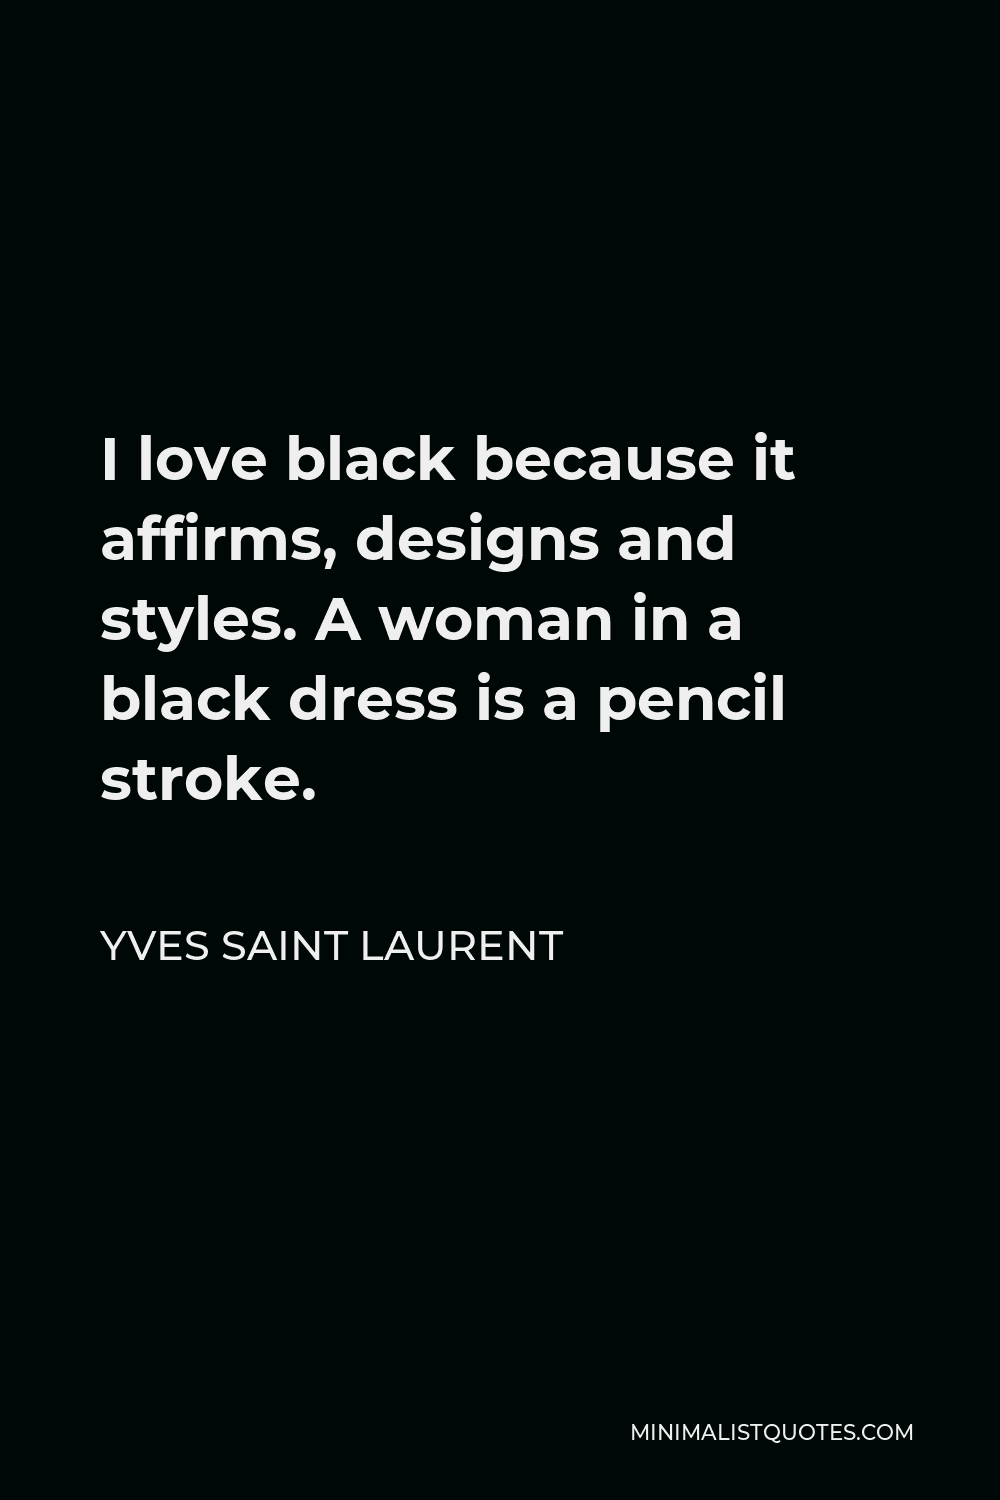 Yves Saint Laurent Quote - I love black because it affirms, designs and styles. A woman in a black dress is a pencil stroke.